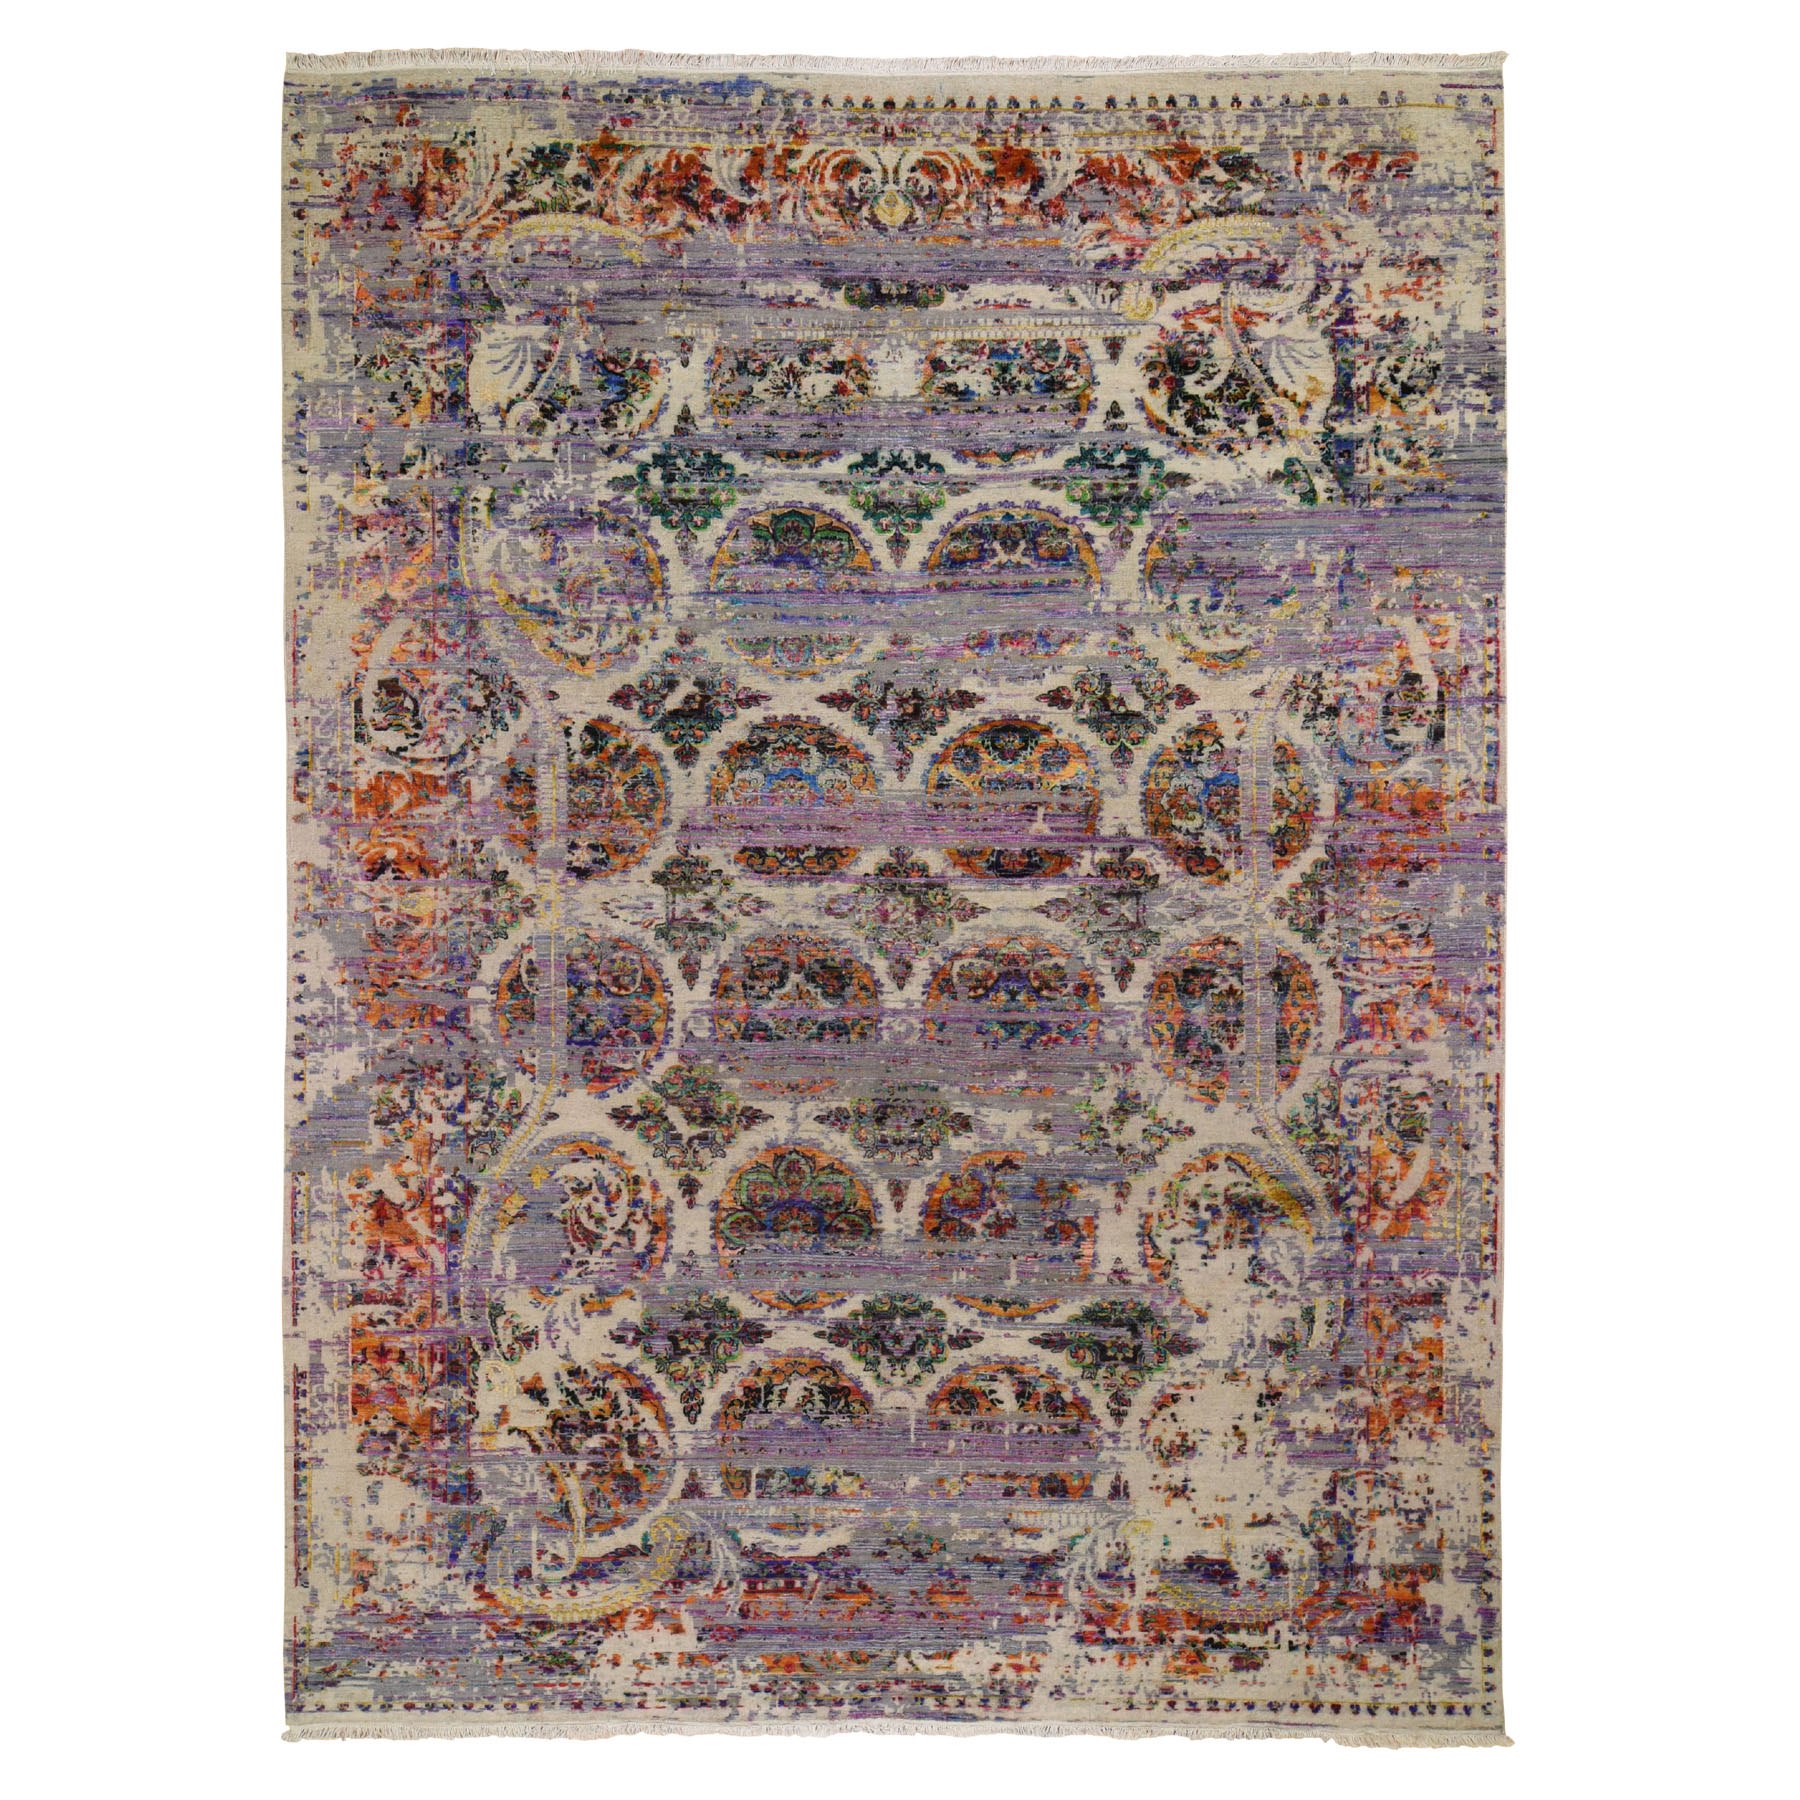 9'x12' ERASED ROSSETS, Colorful Sari Silk With Textured Wool Hand Woven Oriental Rug 